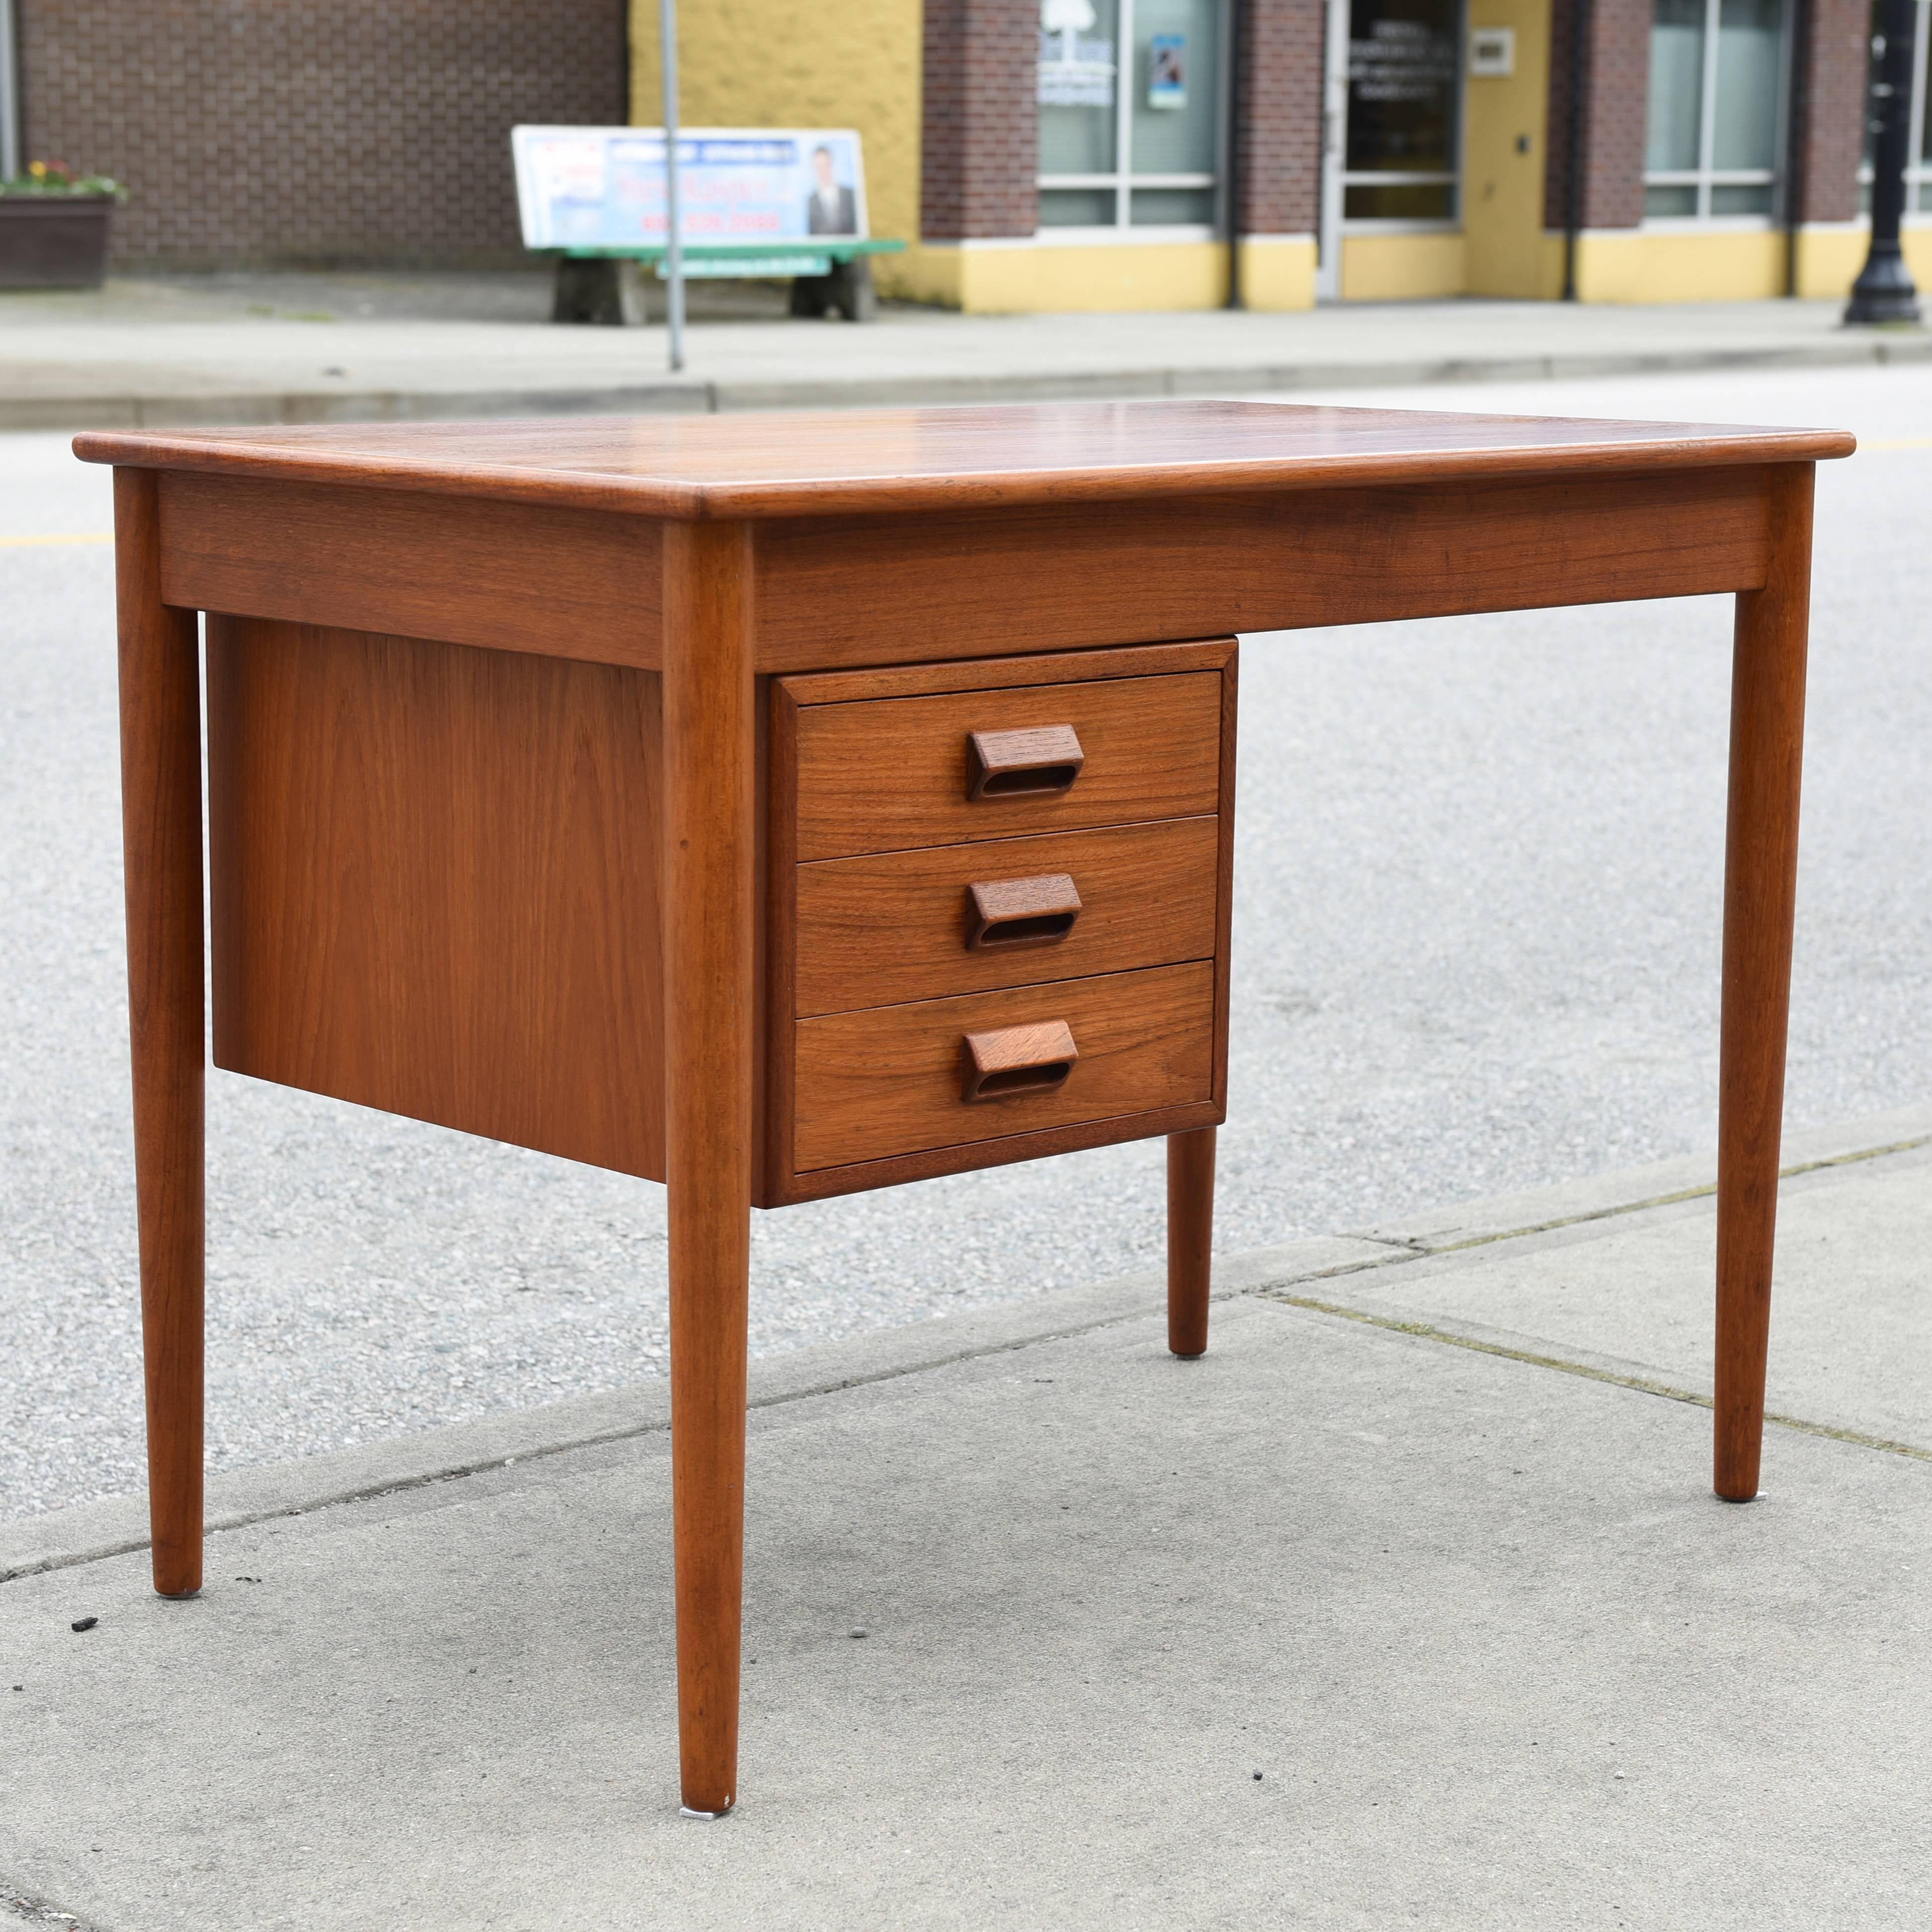 Model 131 Danish modern teak desk by Borge Mogensen for Soborg.
In great vintage condition, top surface has been professionally refinished.